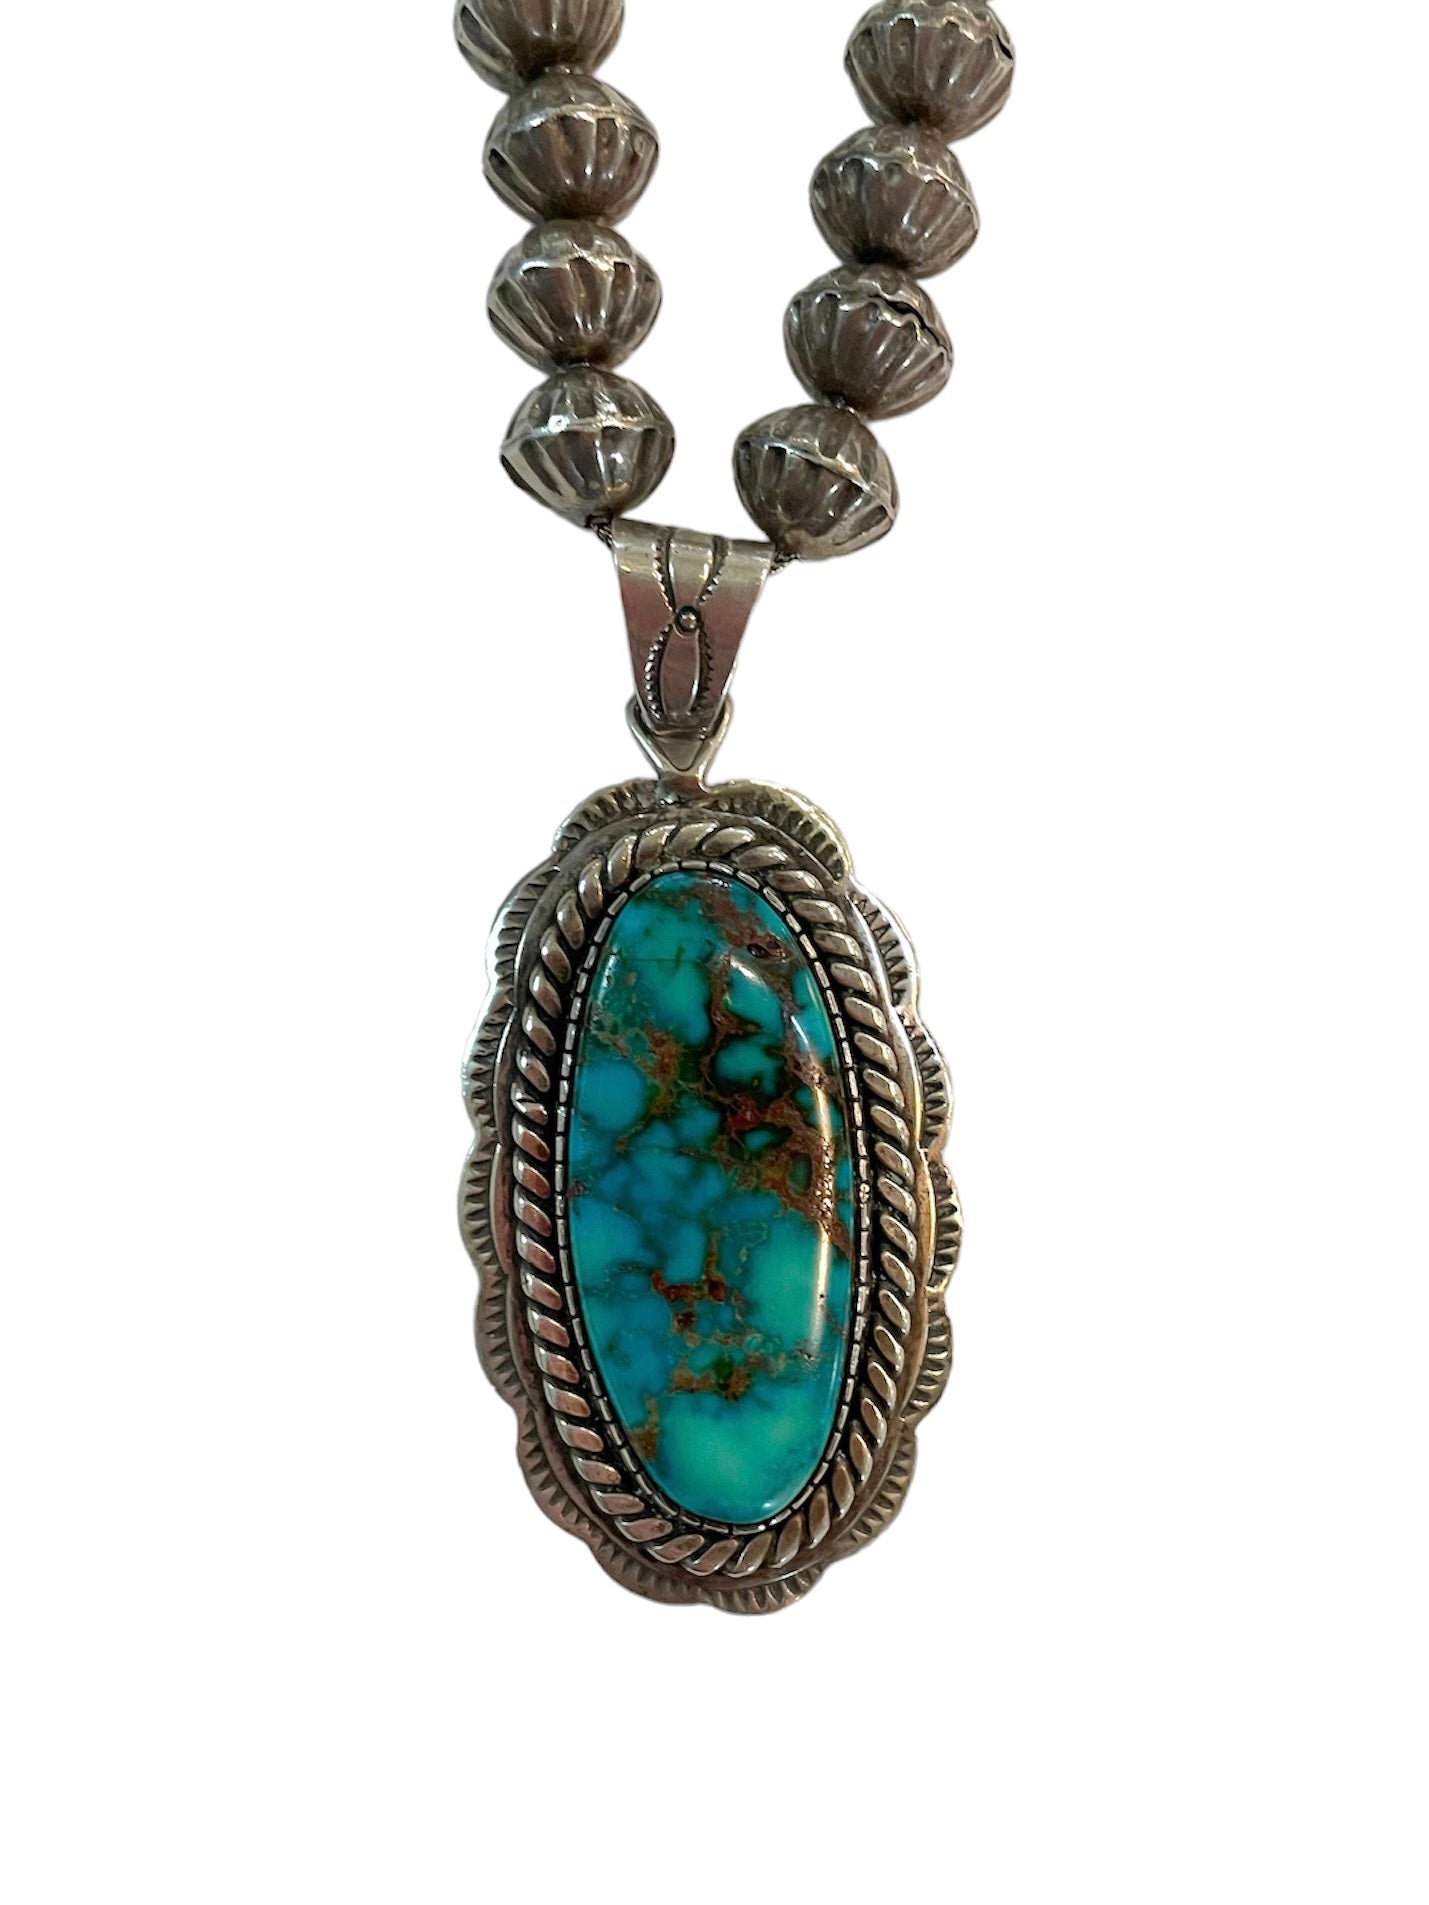 Morenci Turquoise and Sterling Silver Navajo Pendant Necklace DETAIL 2 of 3